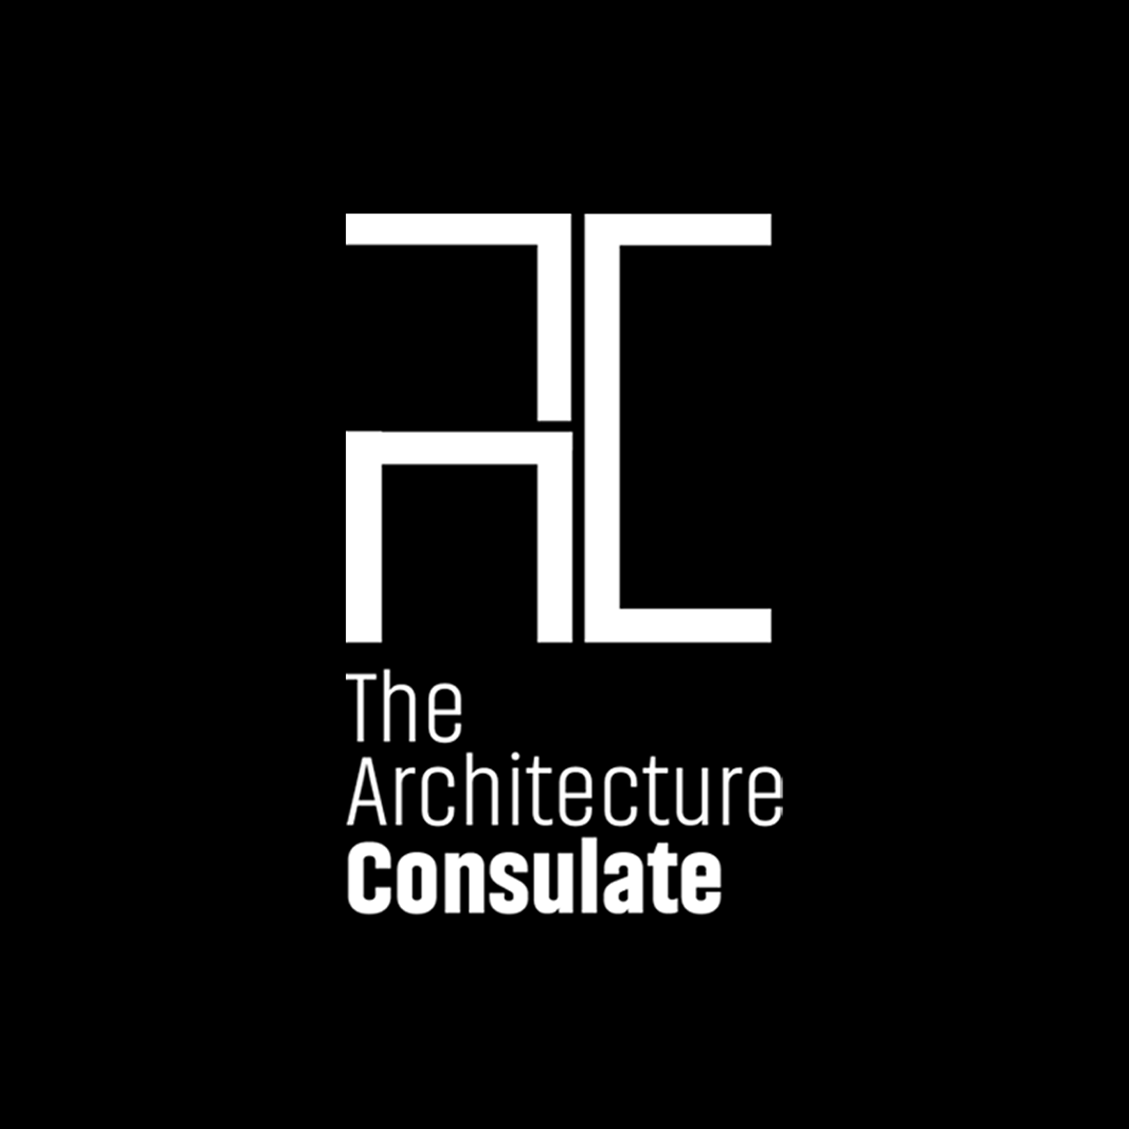 The Architecture Consulate|Legal Services|Professional Services